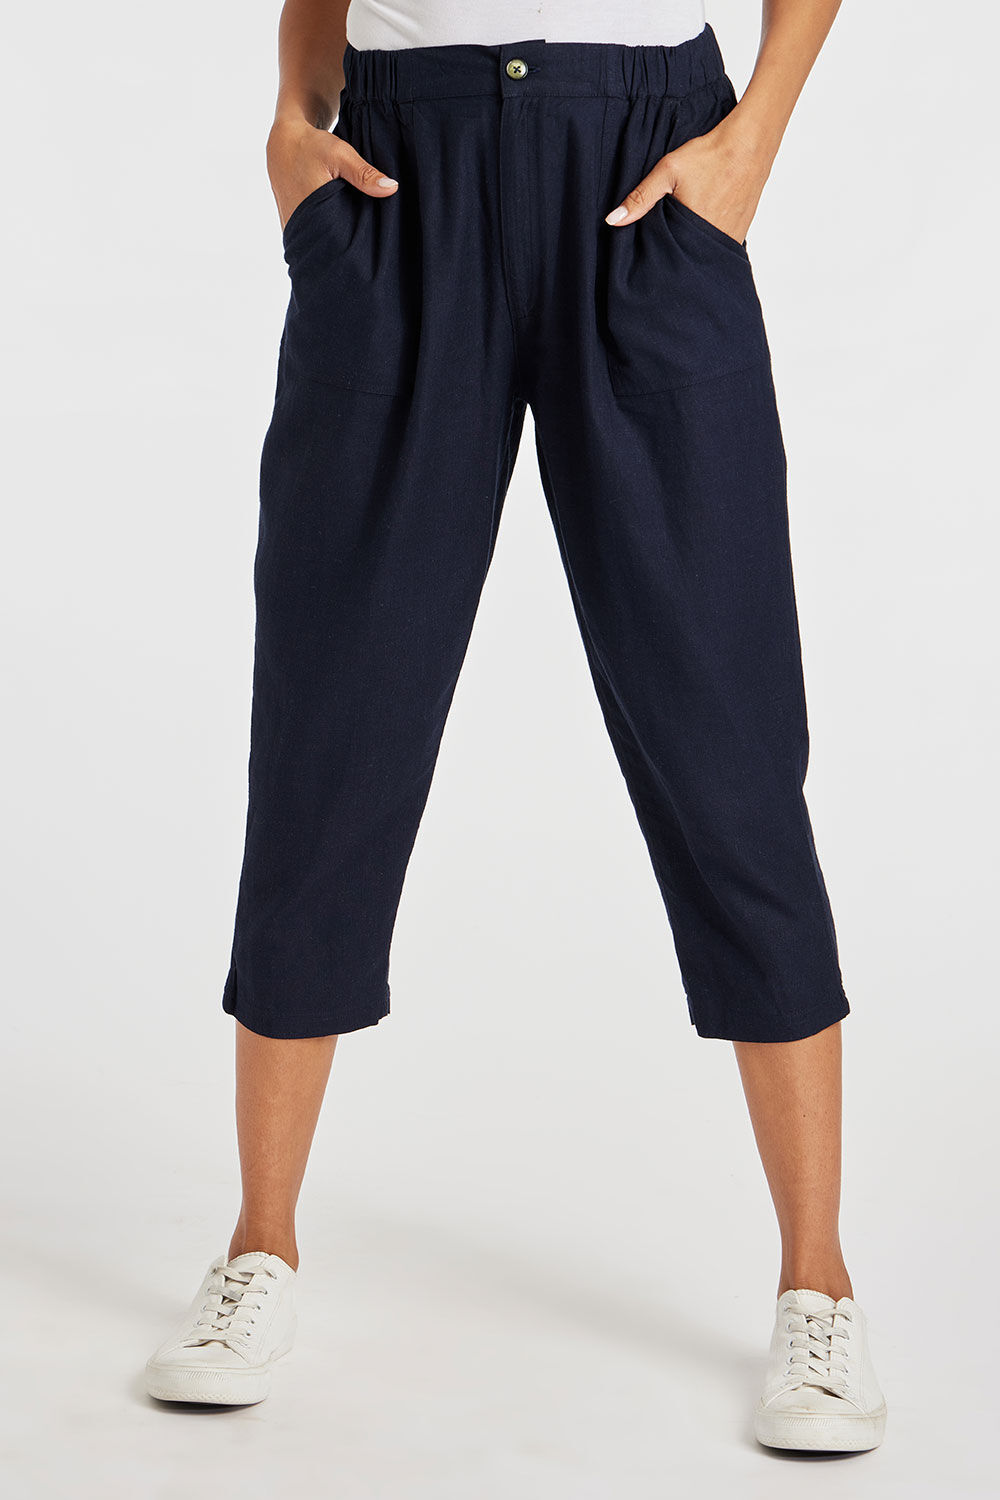 Bonmarche Navy Tapered Cropped Linen Trousers With Button Detail, Size: 10